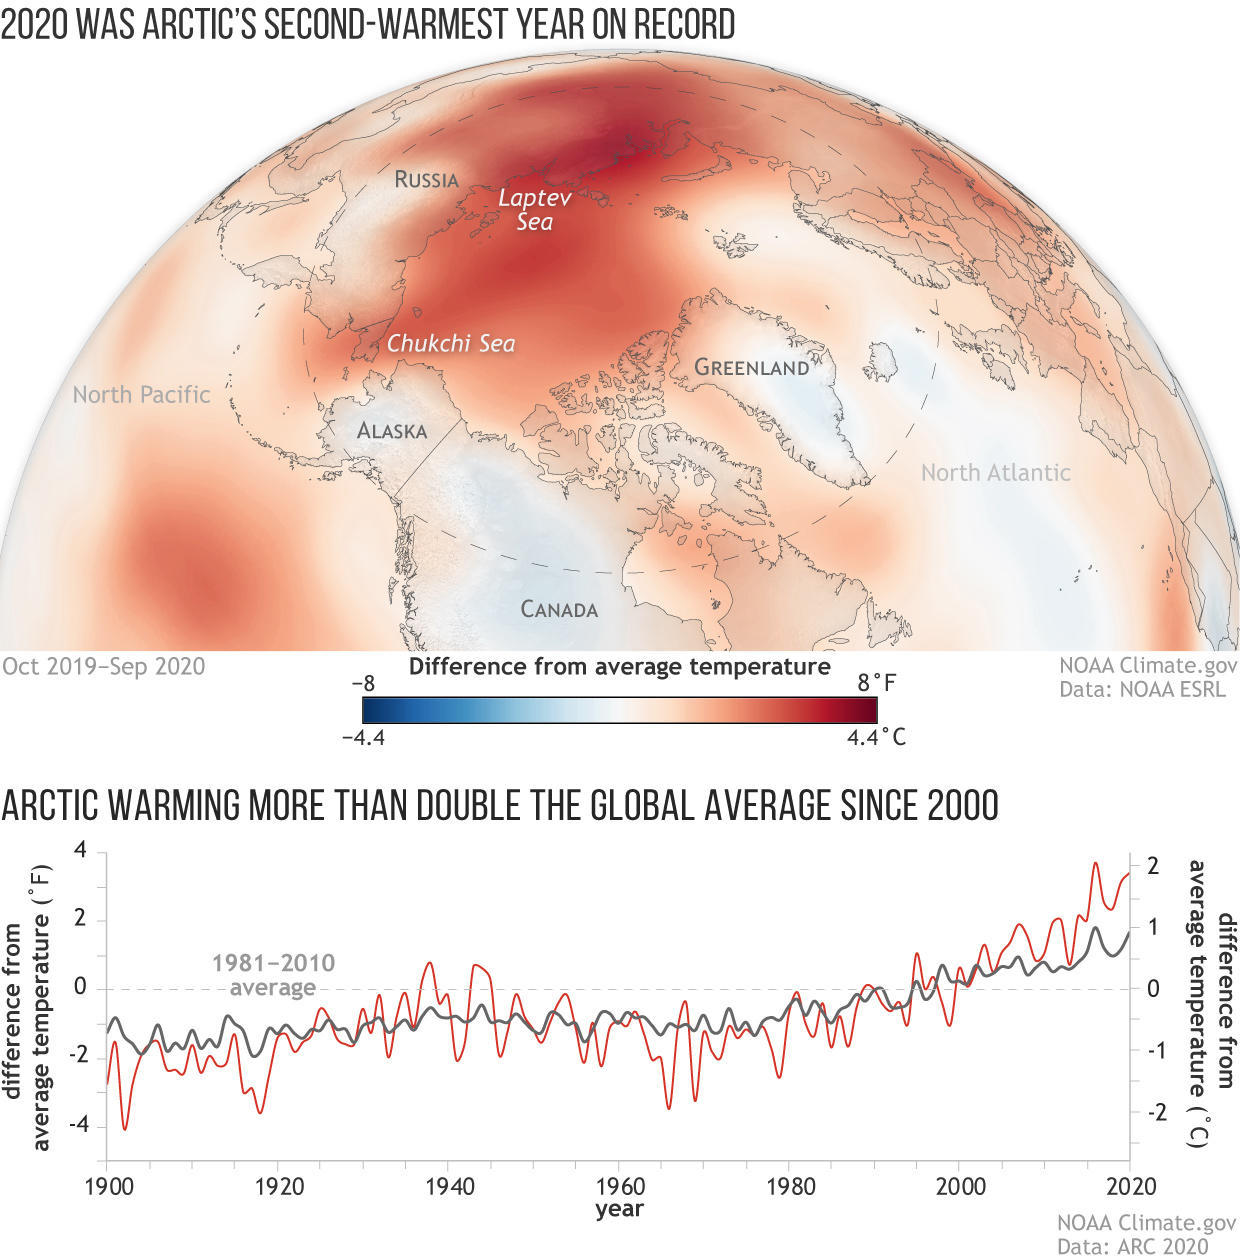 "Alarming" and "extraordinary" rate of change as the Arctic warms, NOAA